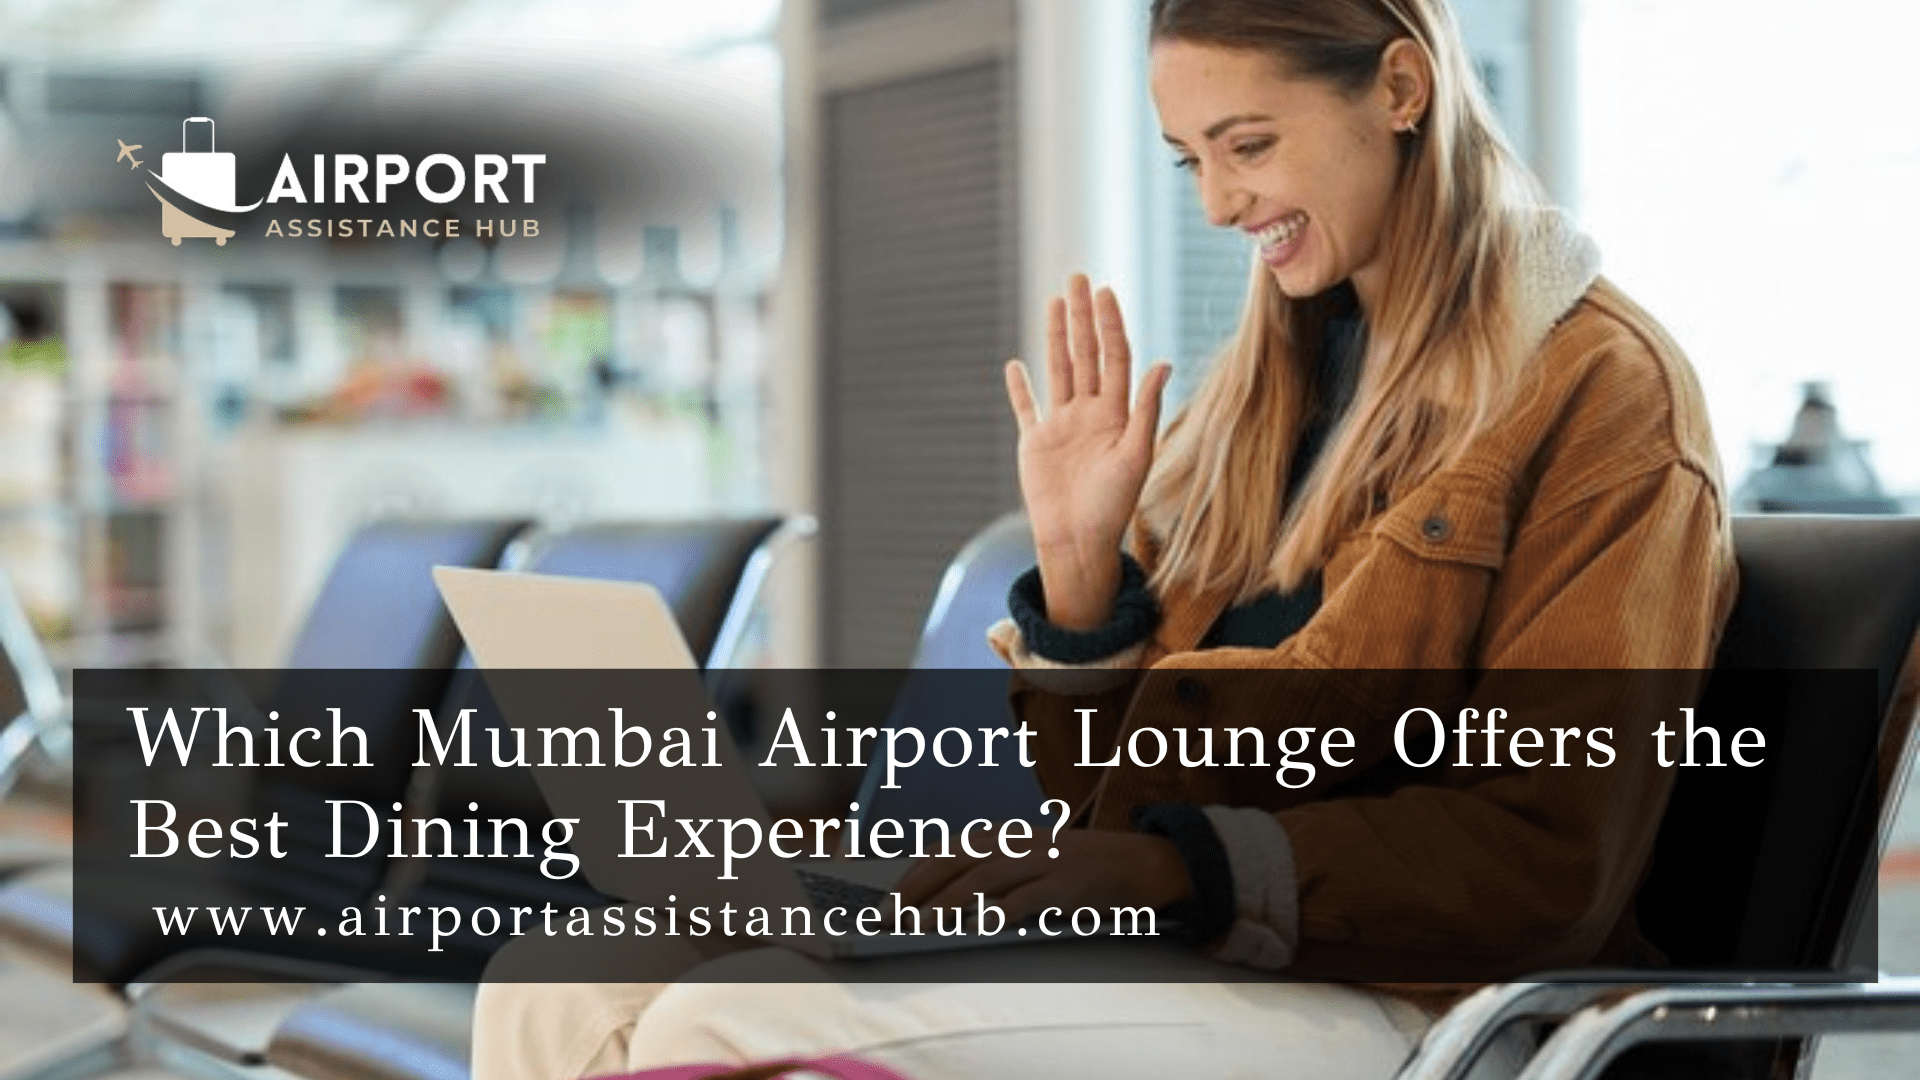 Which Mumbai Airport Lounge Offers the Best Dining Experience?